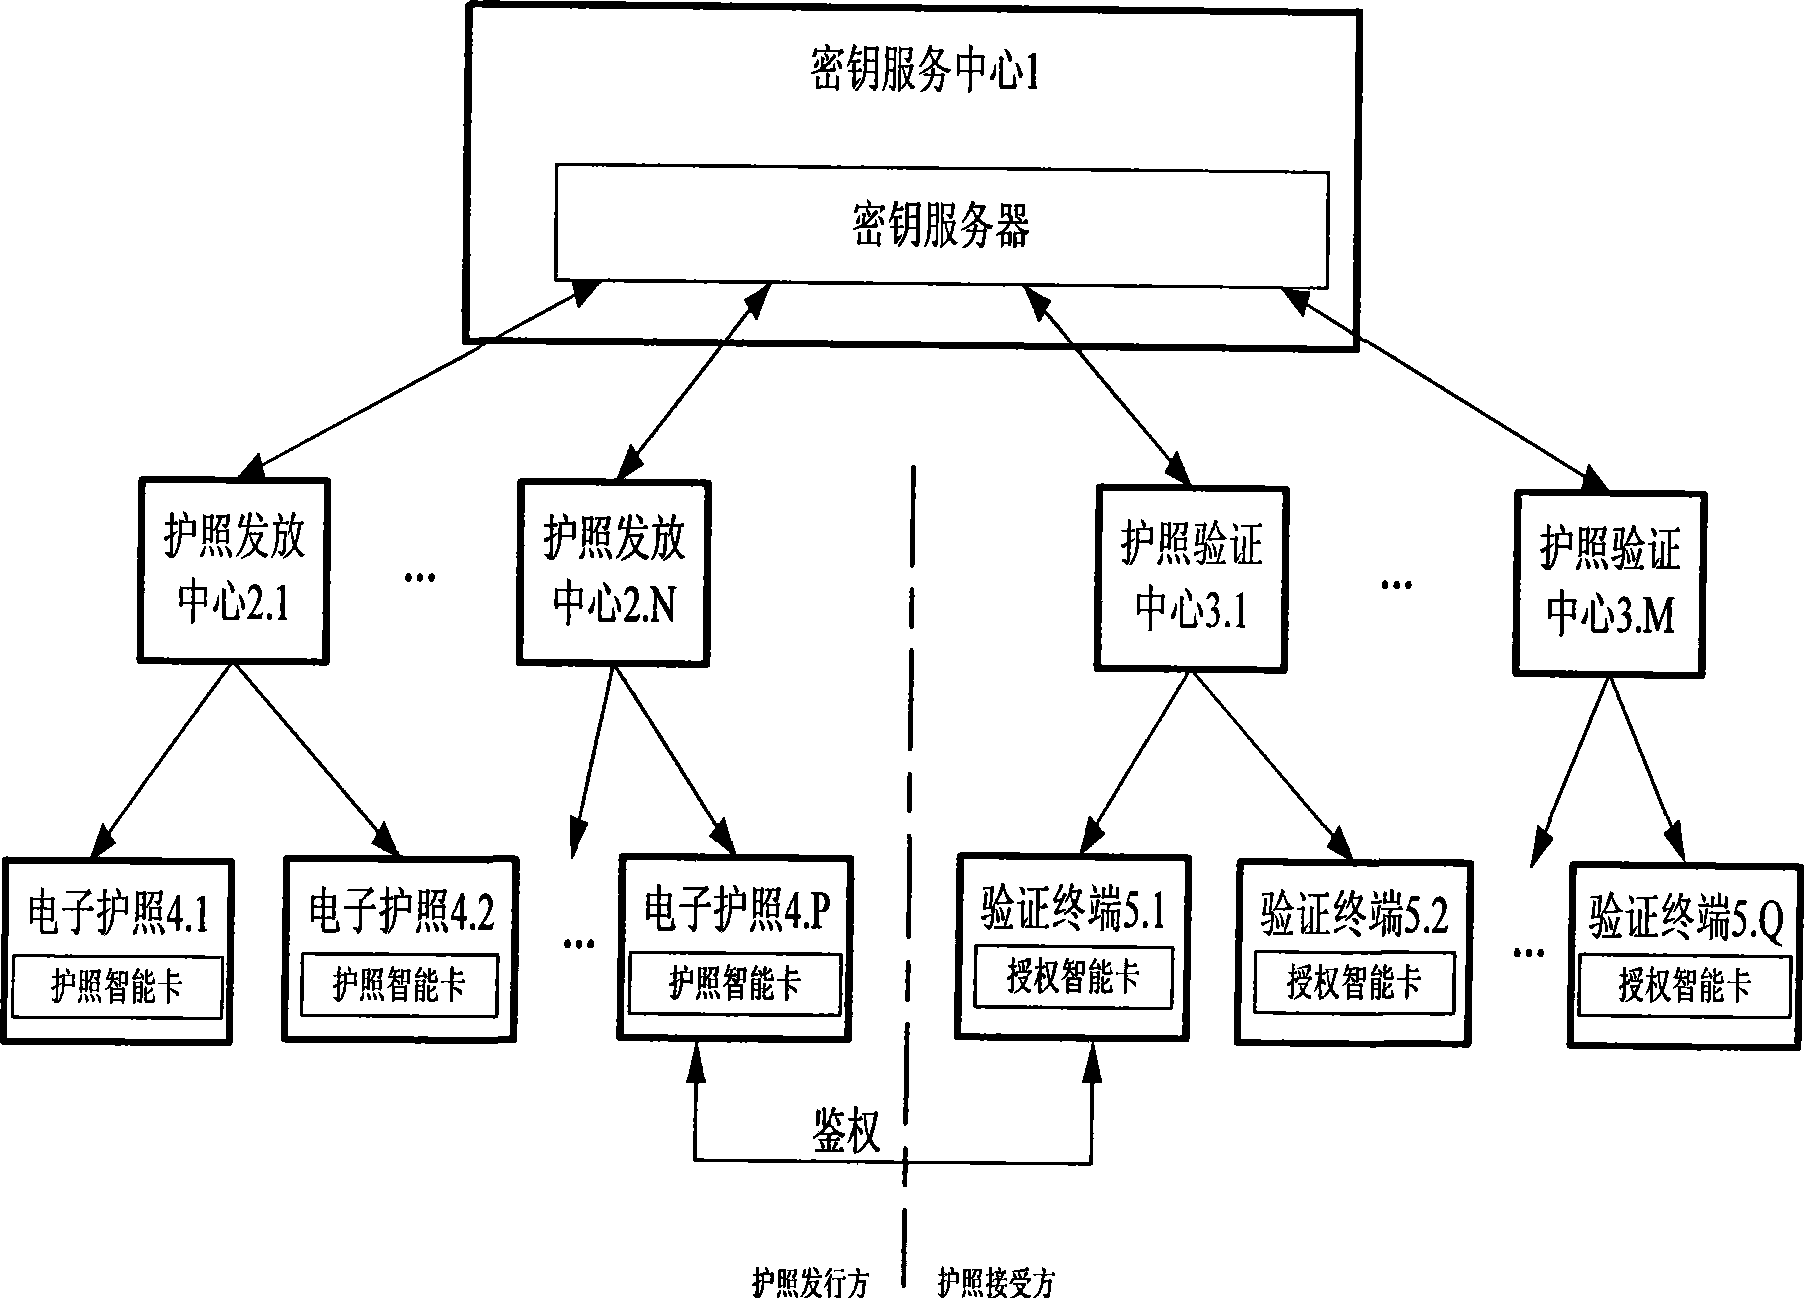 Electronic passport expansion access control system and authentication method based on identification cipher technology